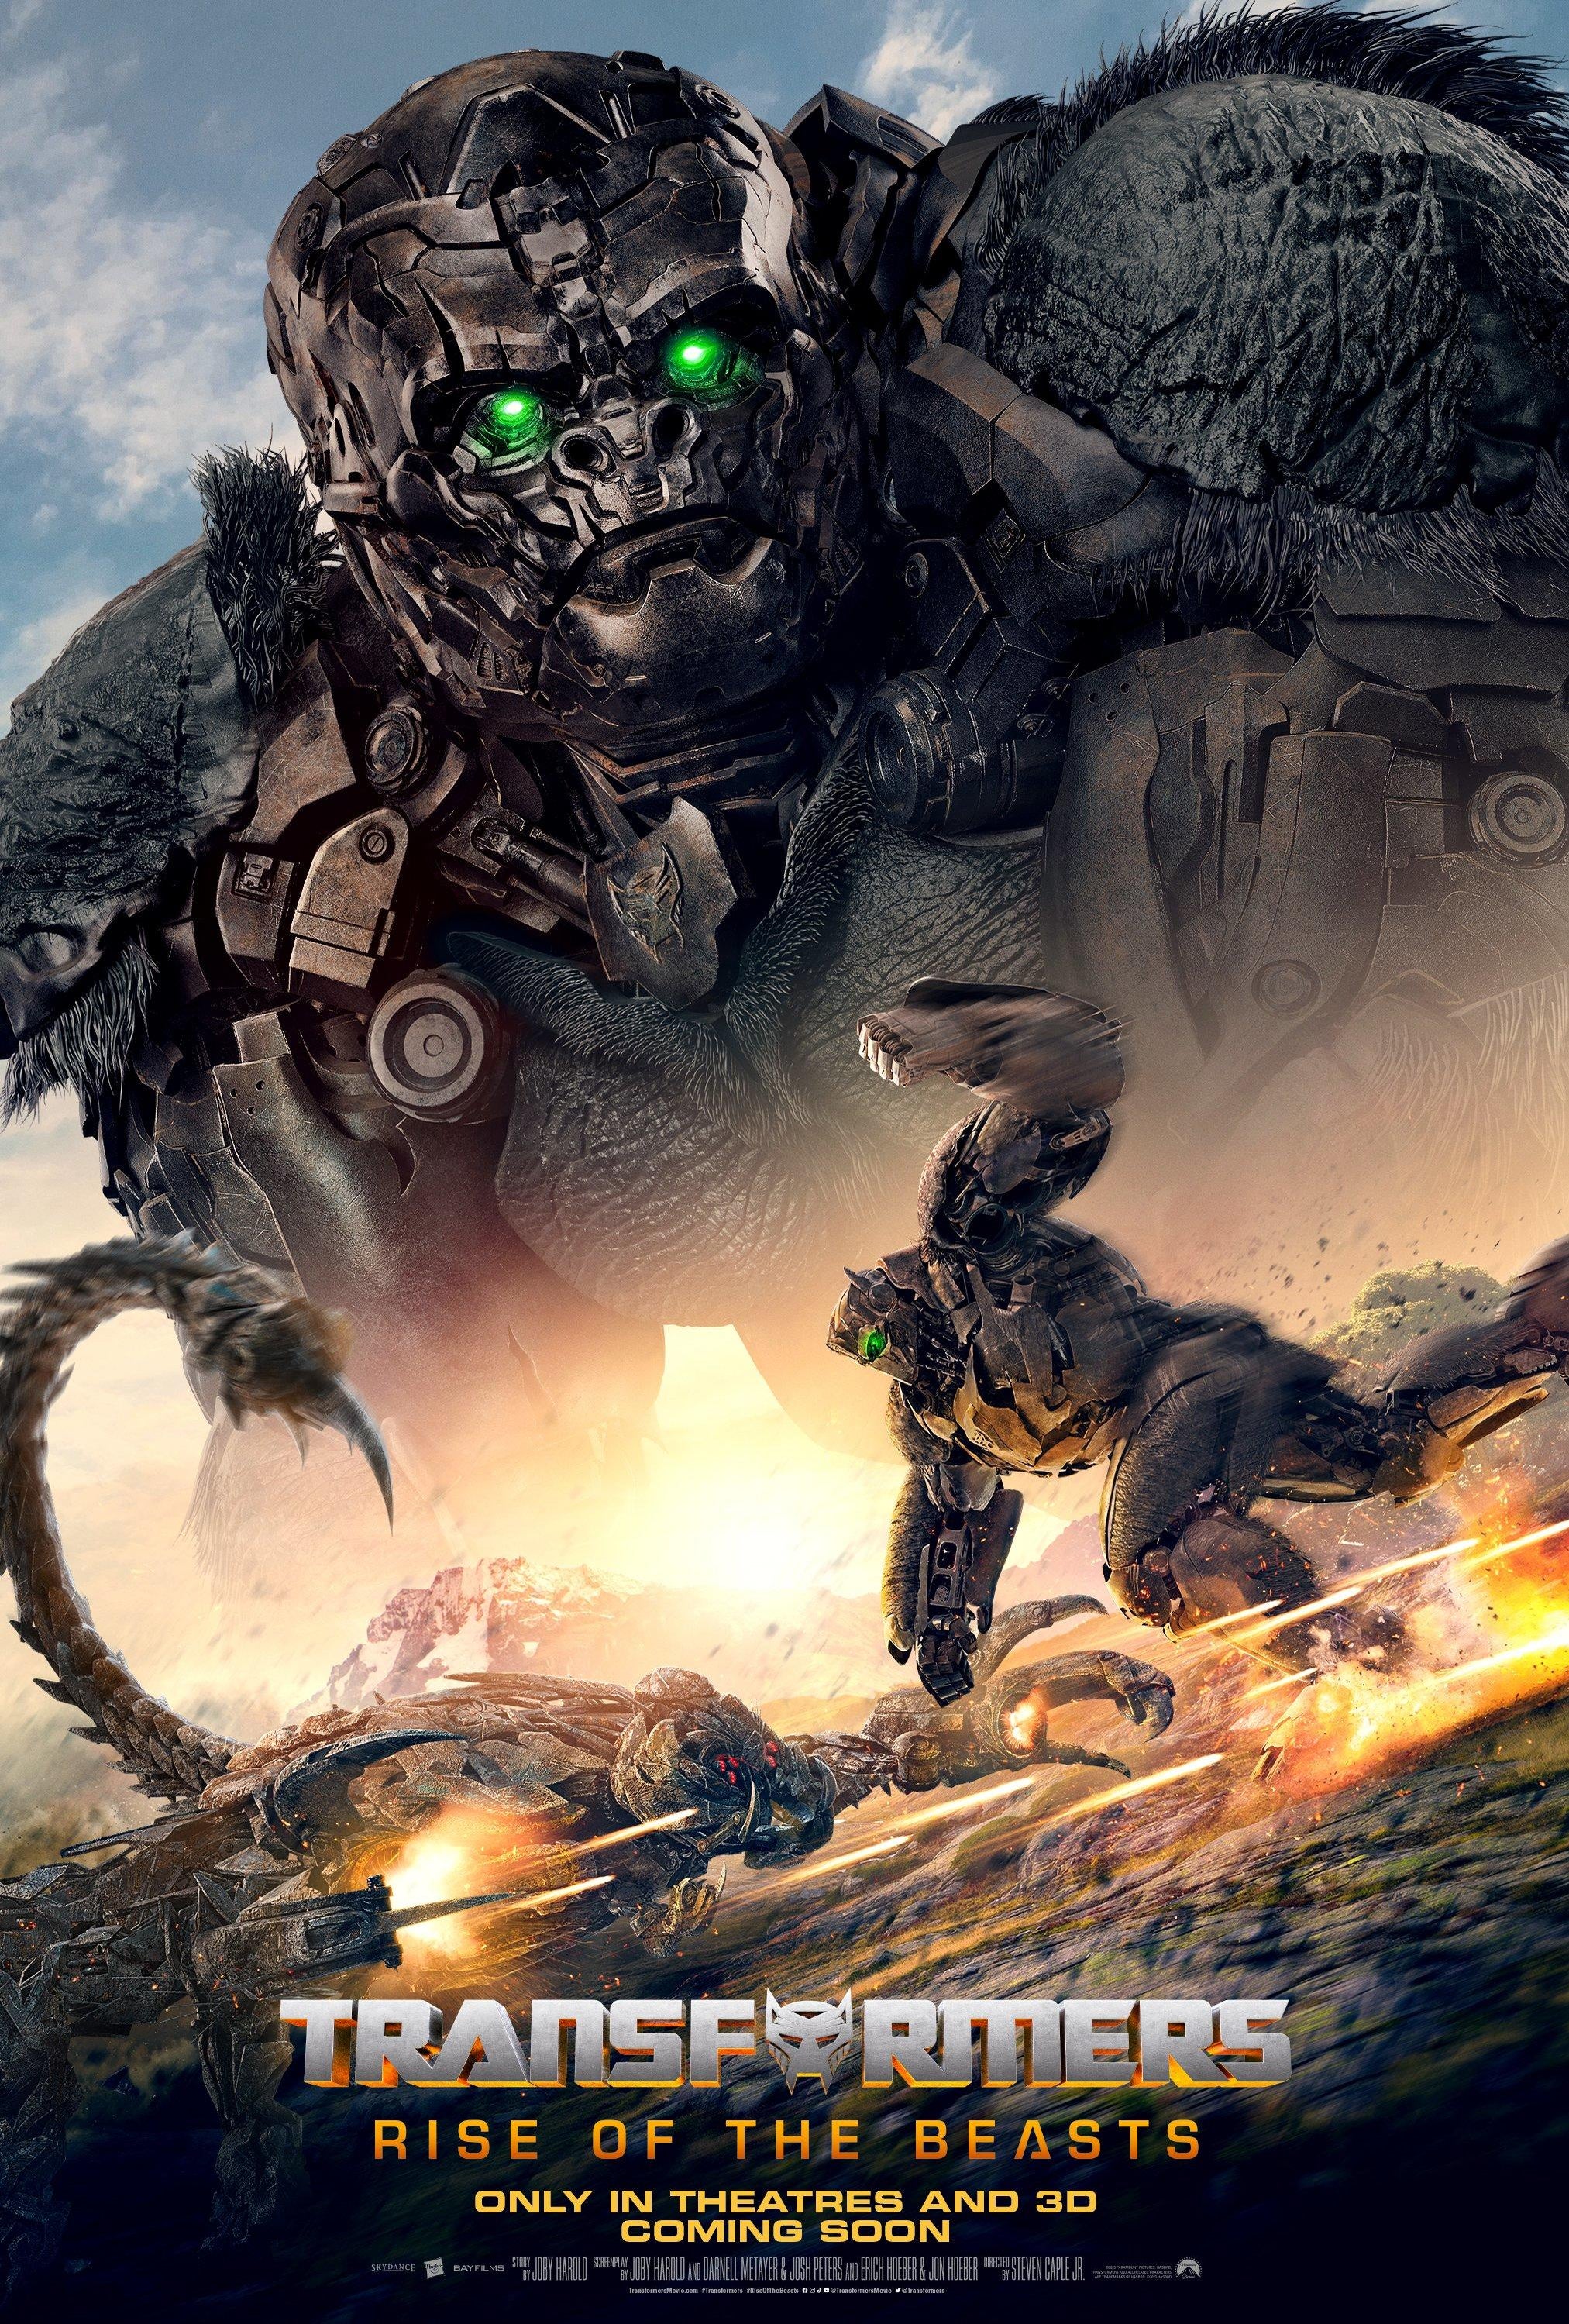 New Transformers: Rise of the Beasts Posters Reveals Main Characters